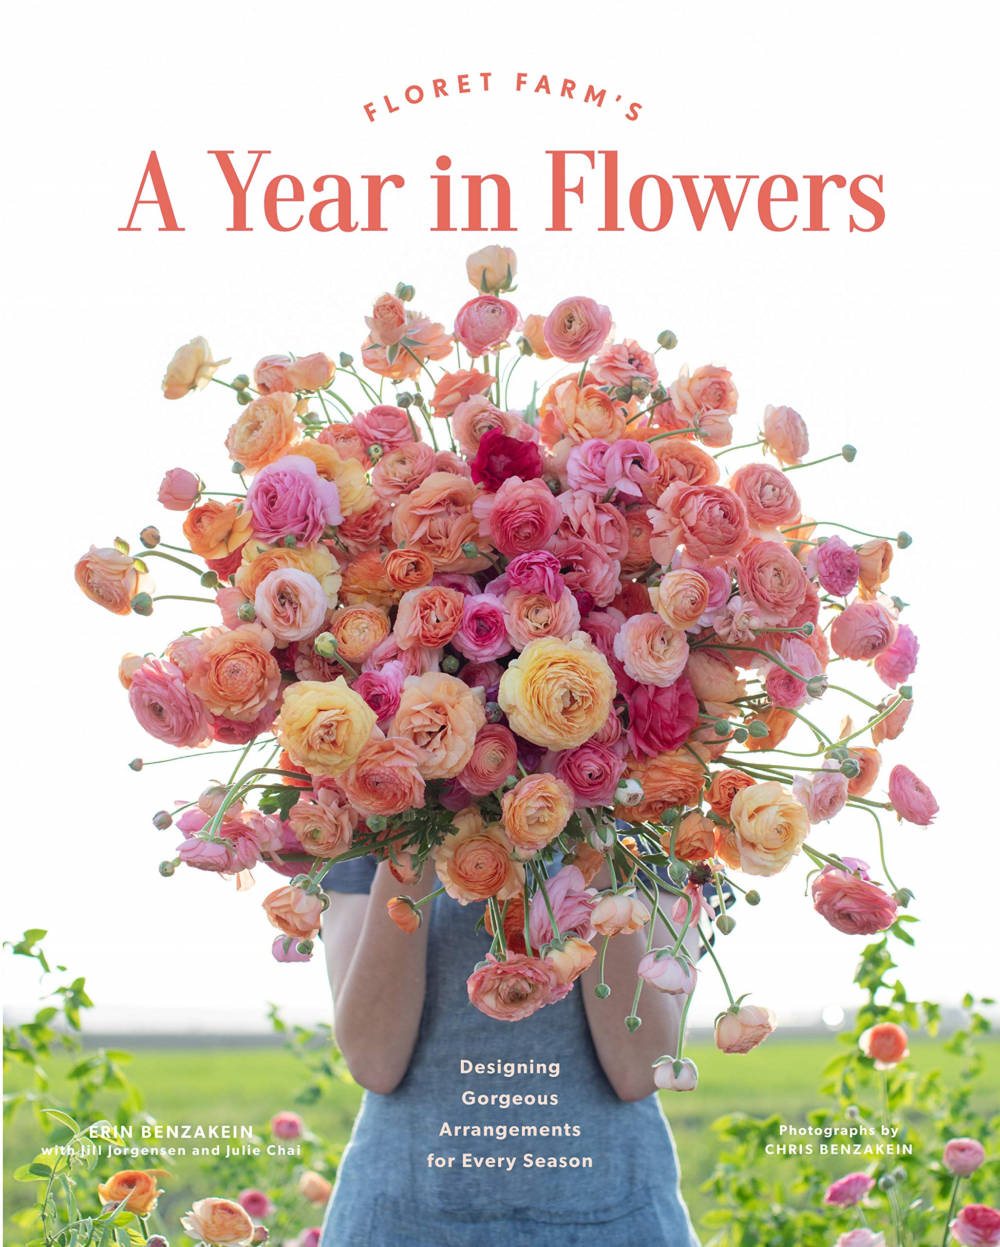 Floret Farm’s a Year in Flowers: Designing Gorgeous Arrangements for Every Season (Flower Arranging Book, Bouquet and Floral Design Book)